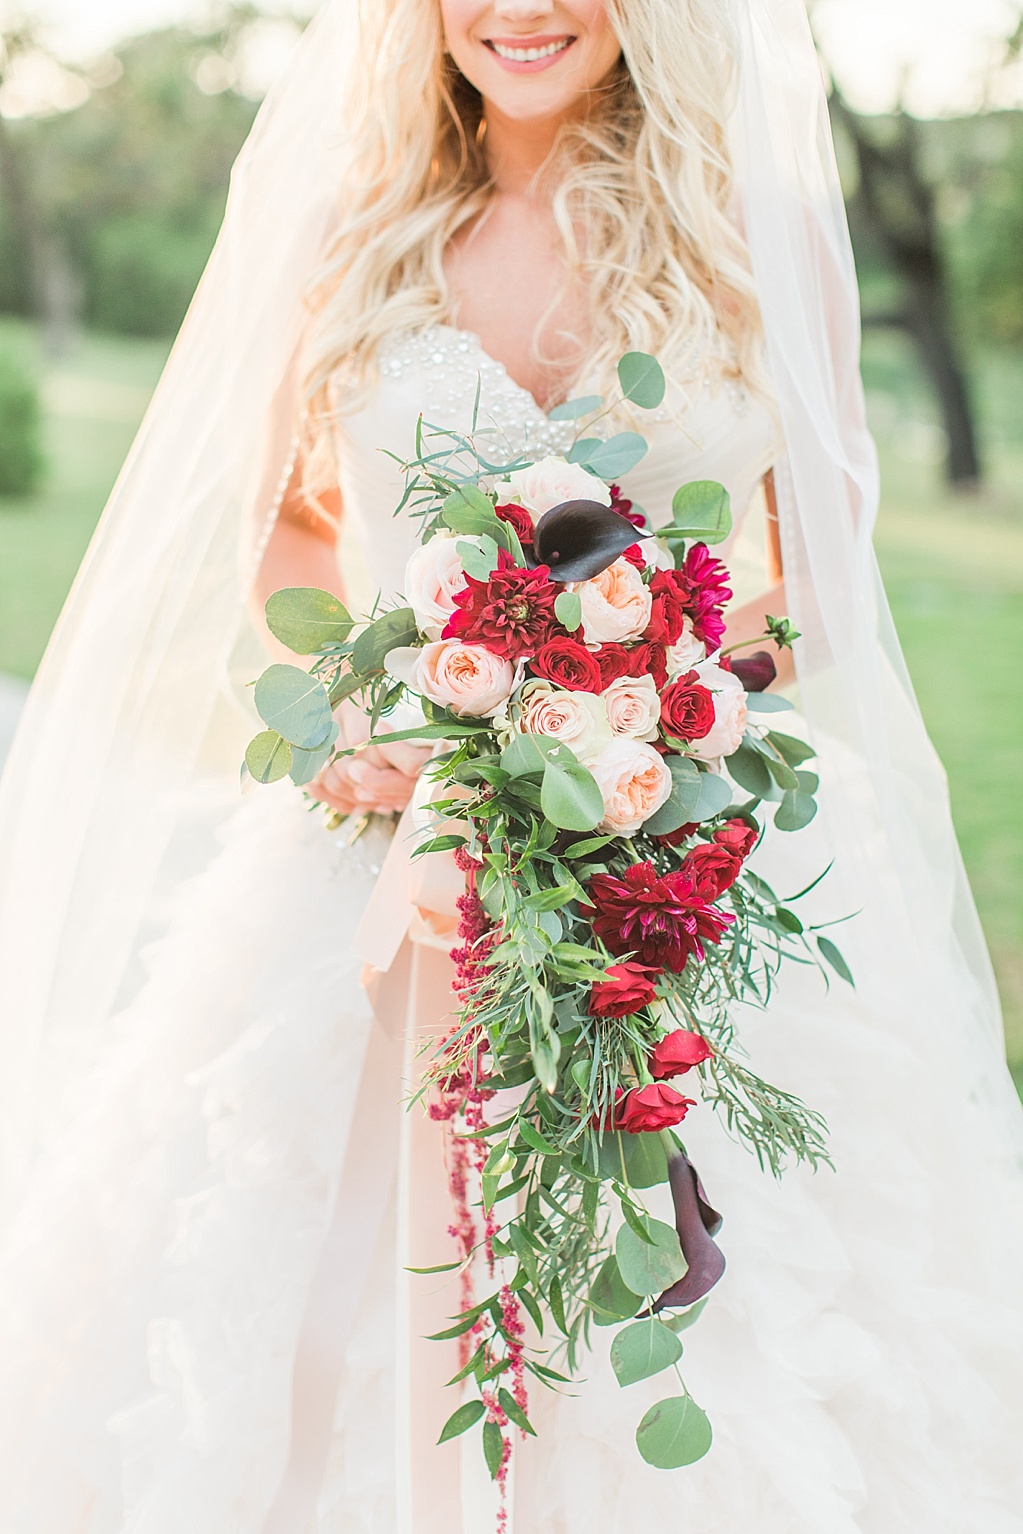 A Classic Bridal Session at Turtle Creek Olive Grove Wedding Venue in Kerrville, Texas 0014